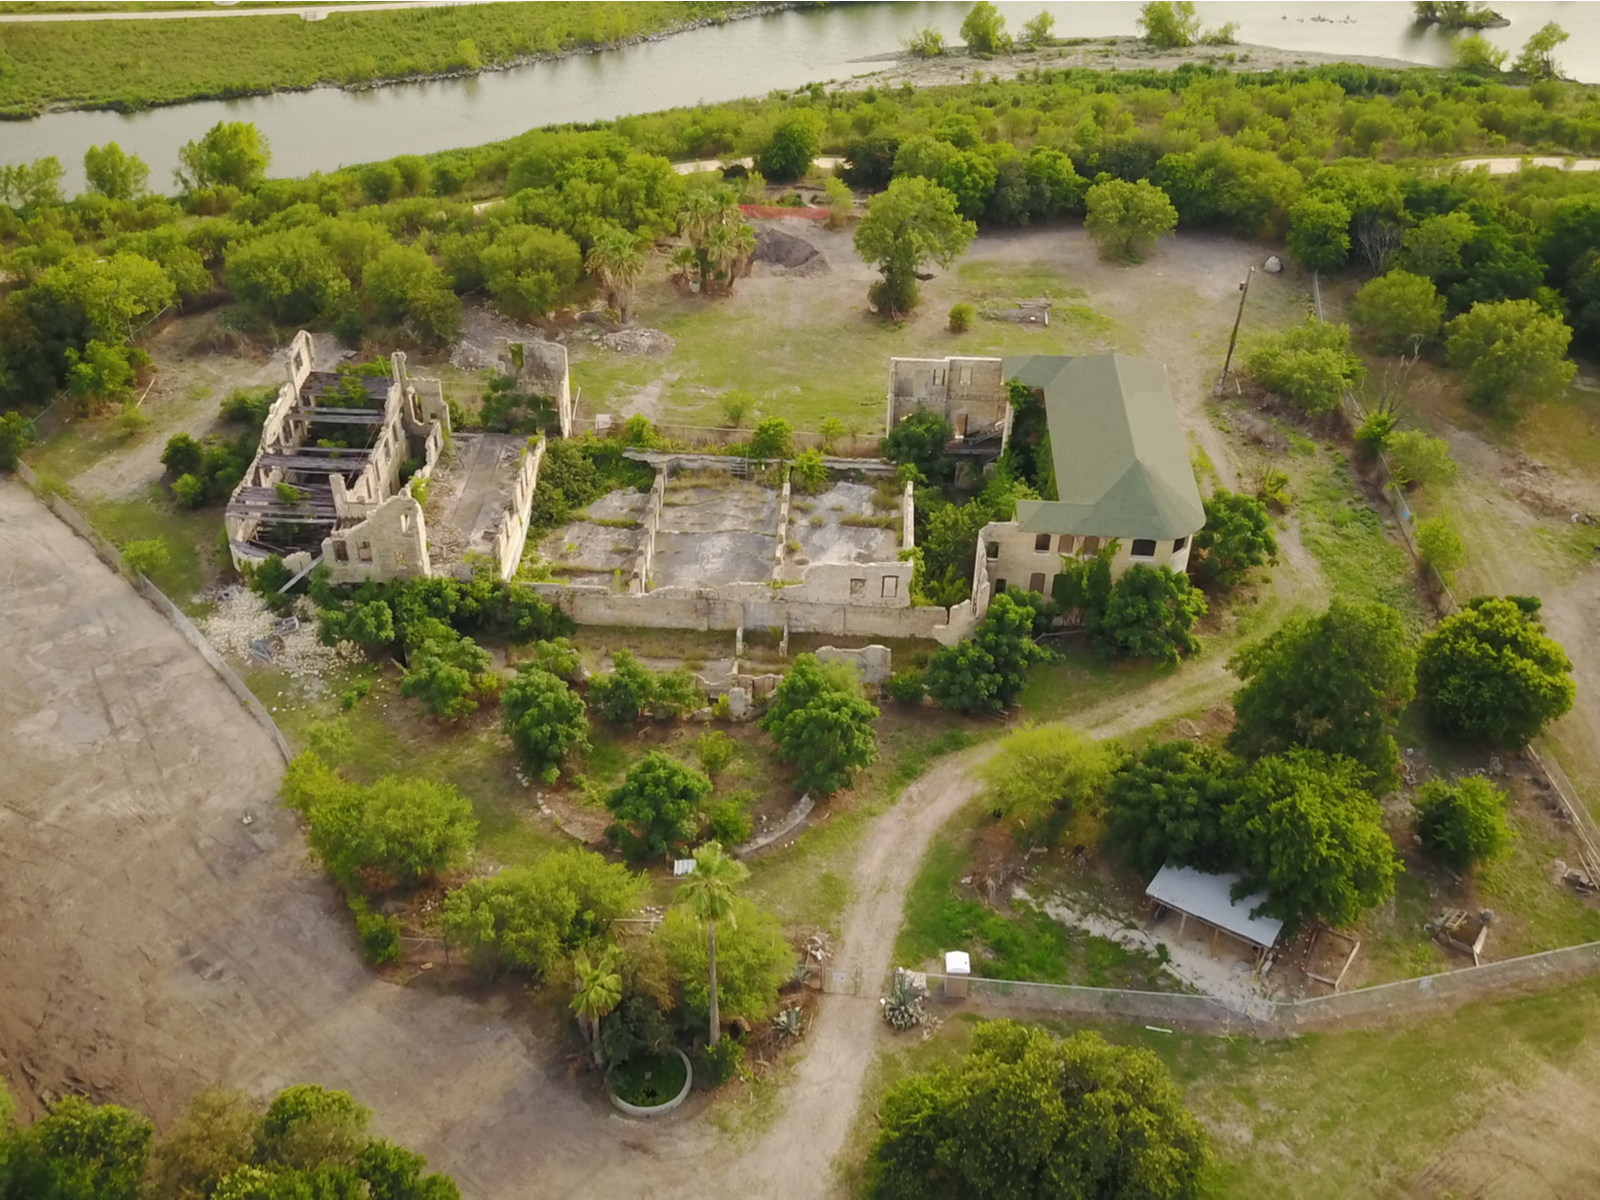 Image of the Hot Wells Resort ruins, one of the best attractions in San Antonio